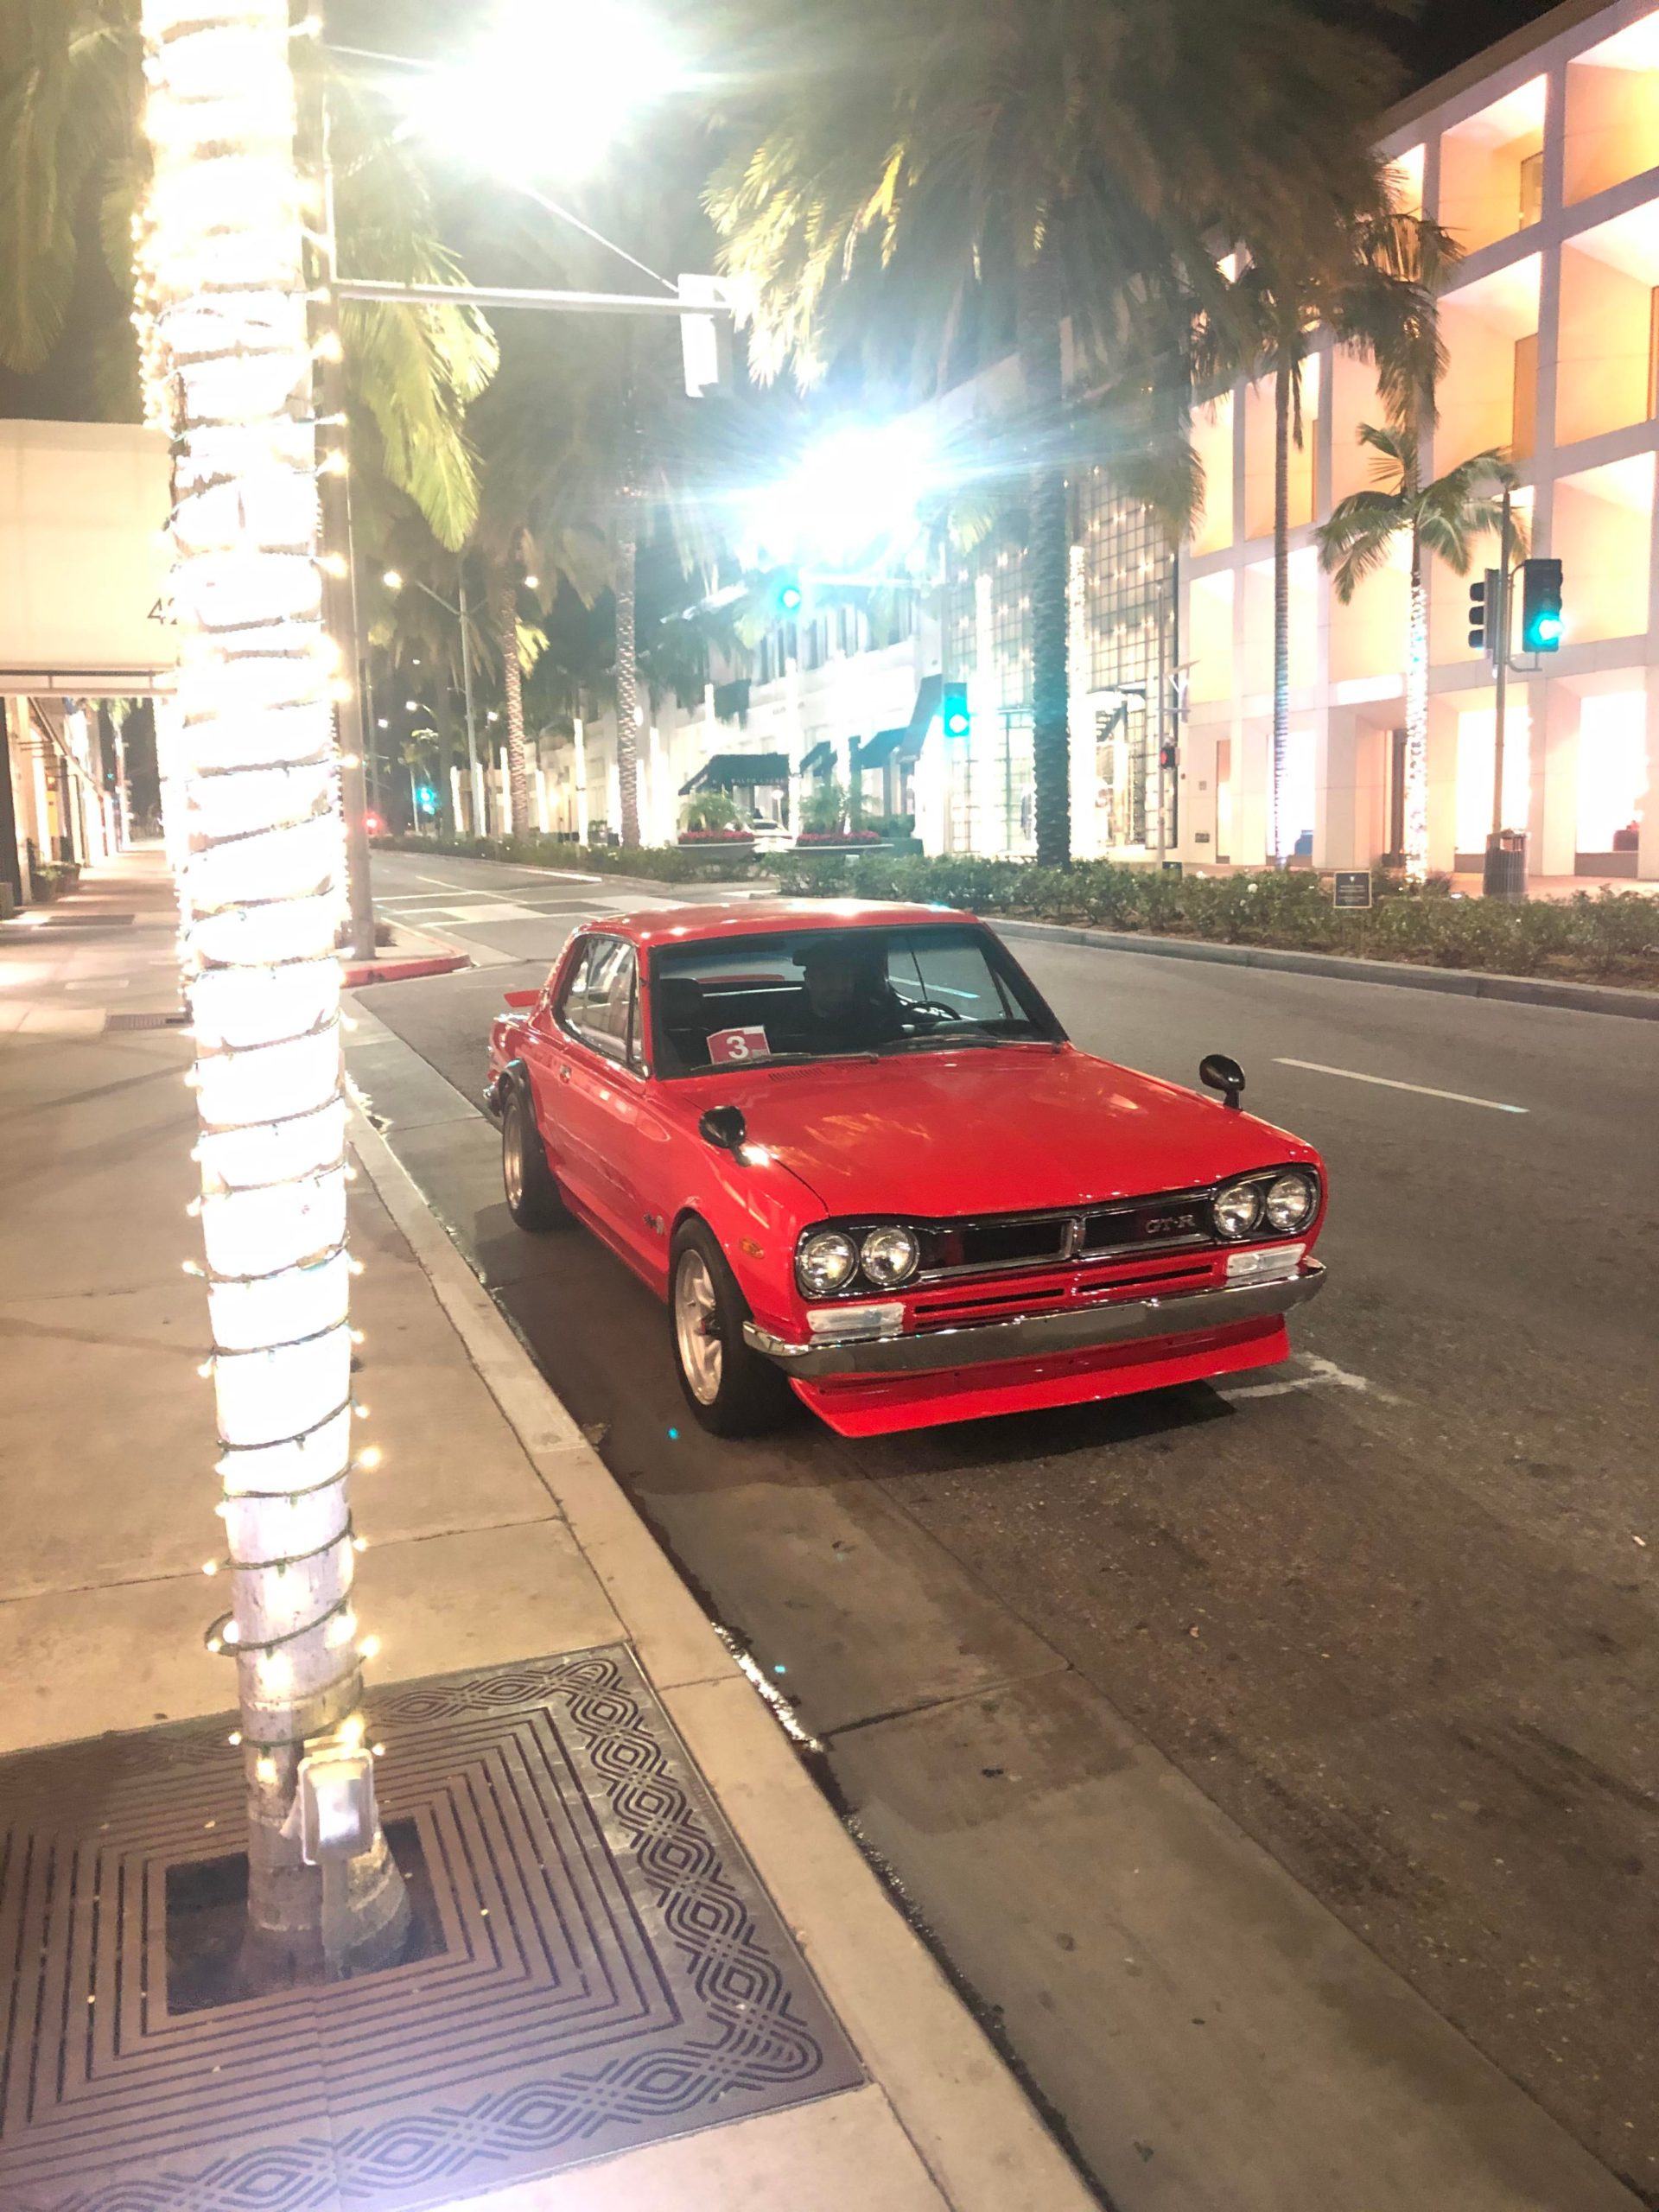 Just saw this Skyline GTR in Beverly Hills. Owner is from Qatar and converted it to LHD so he can legally drive it in Qatar